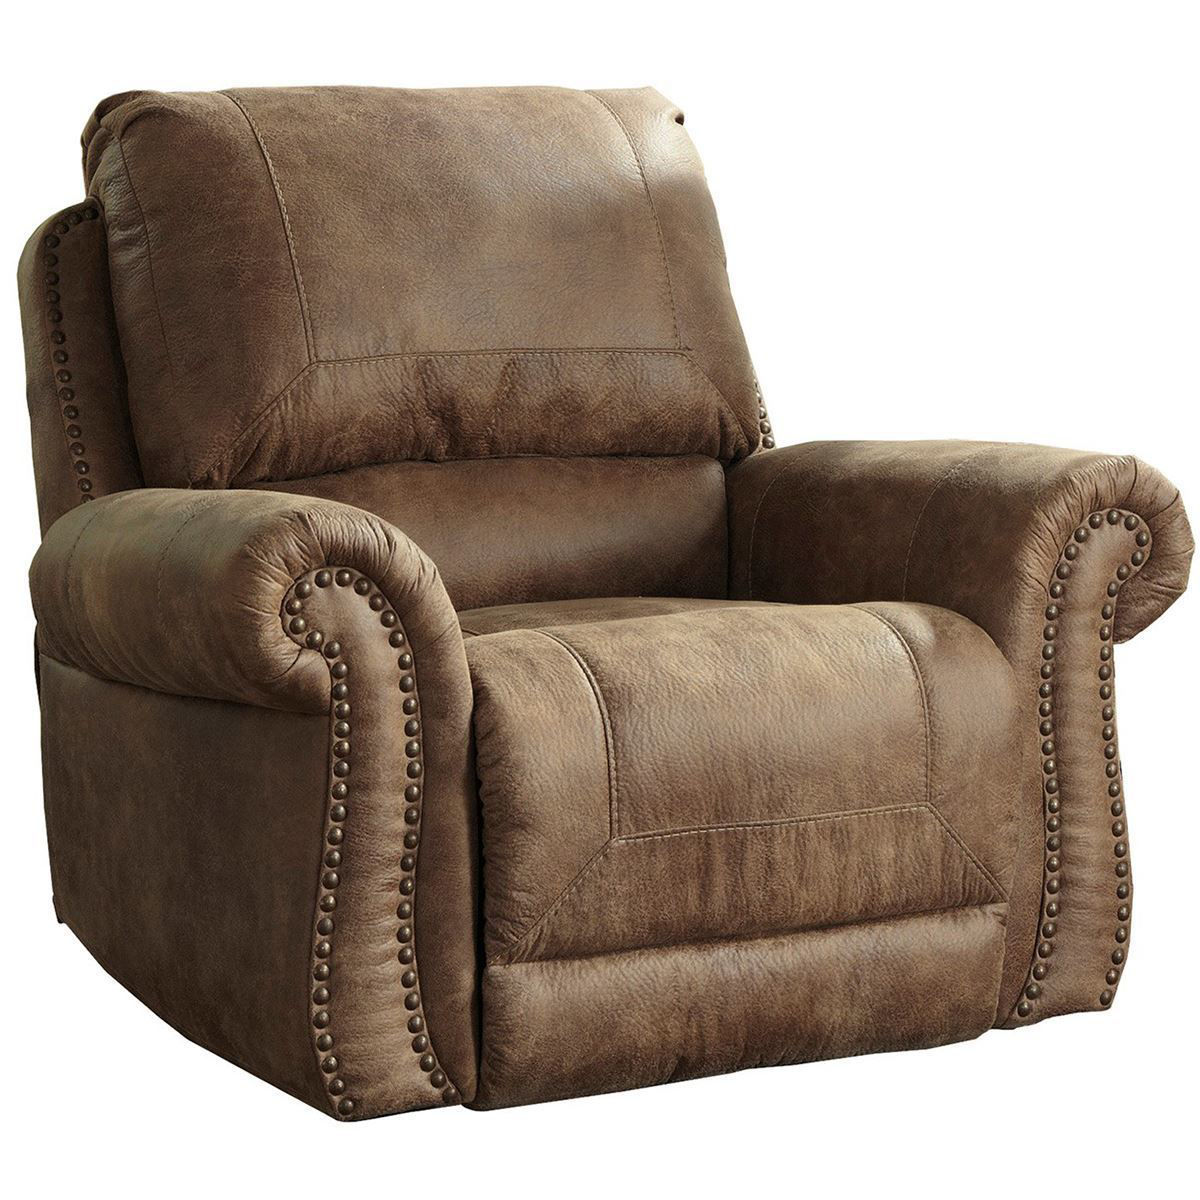 Maddy Rocker Recliner Living Room Chairs Lifestyle Furniture by
Babette's